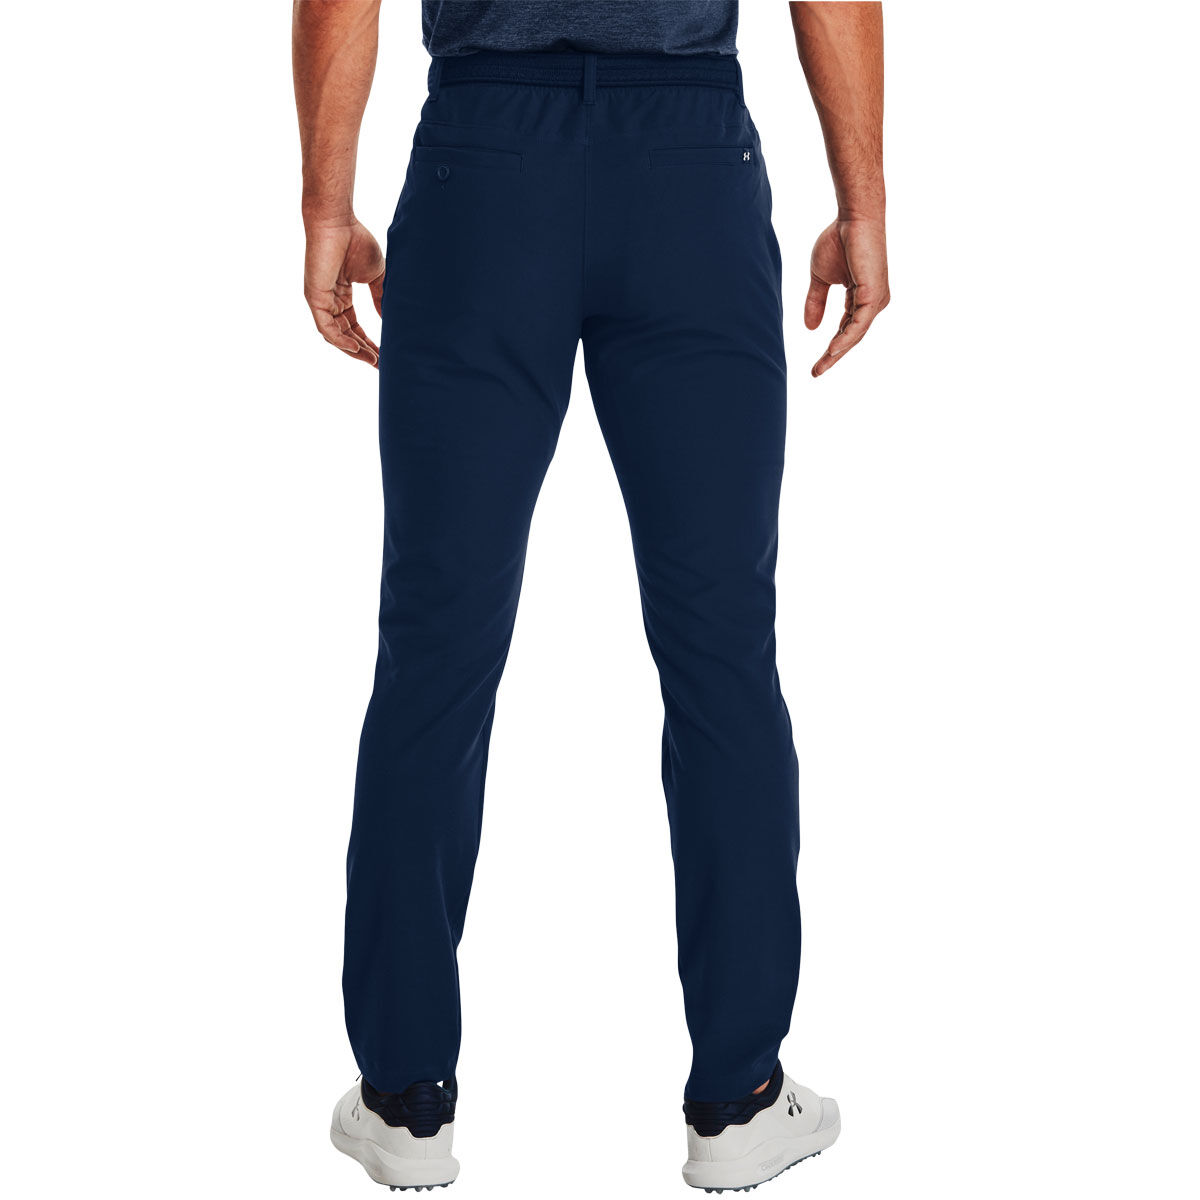 Men's Drive Tapered Pant, UNDER ARMOUR